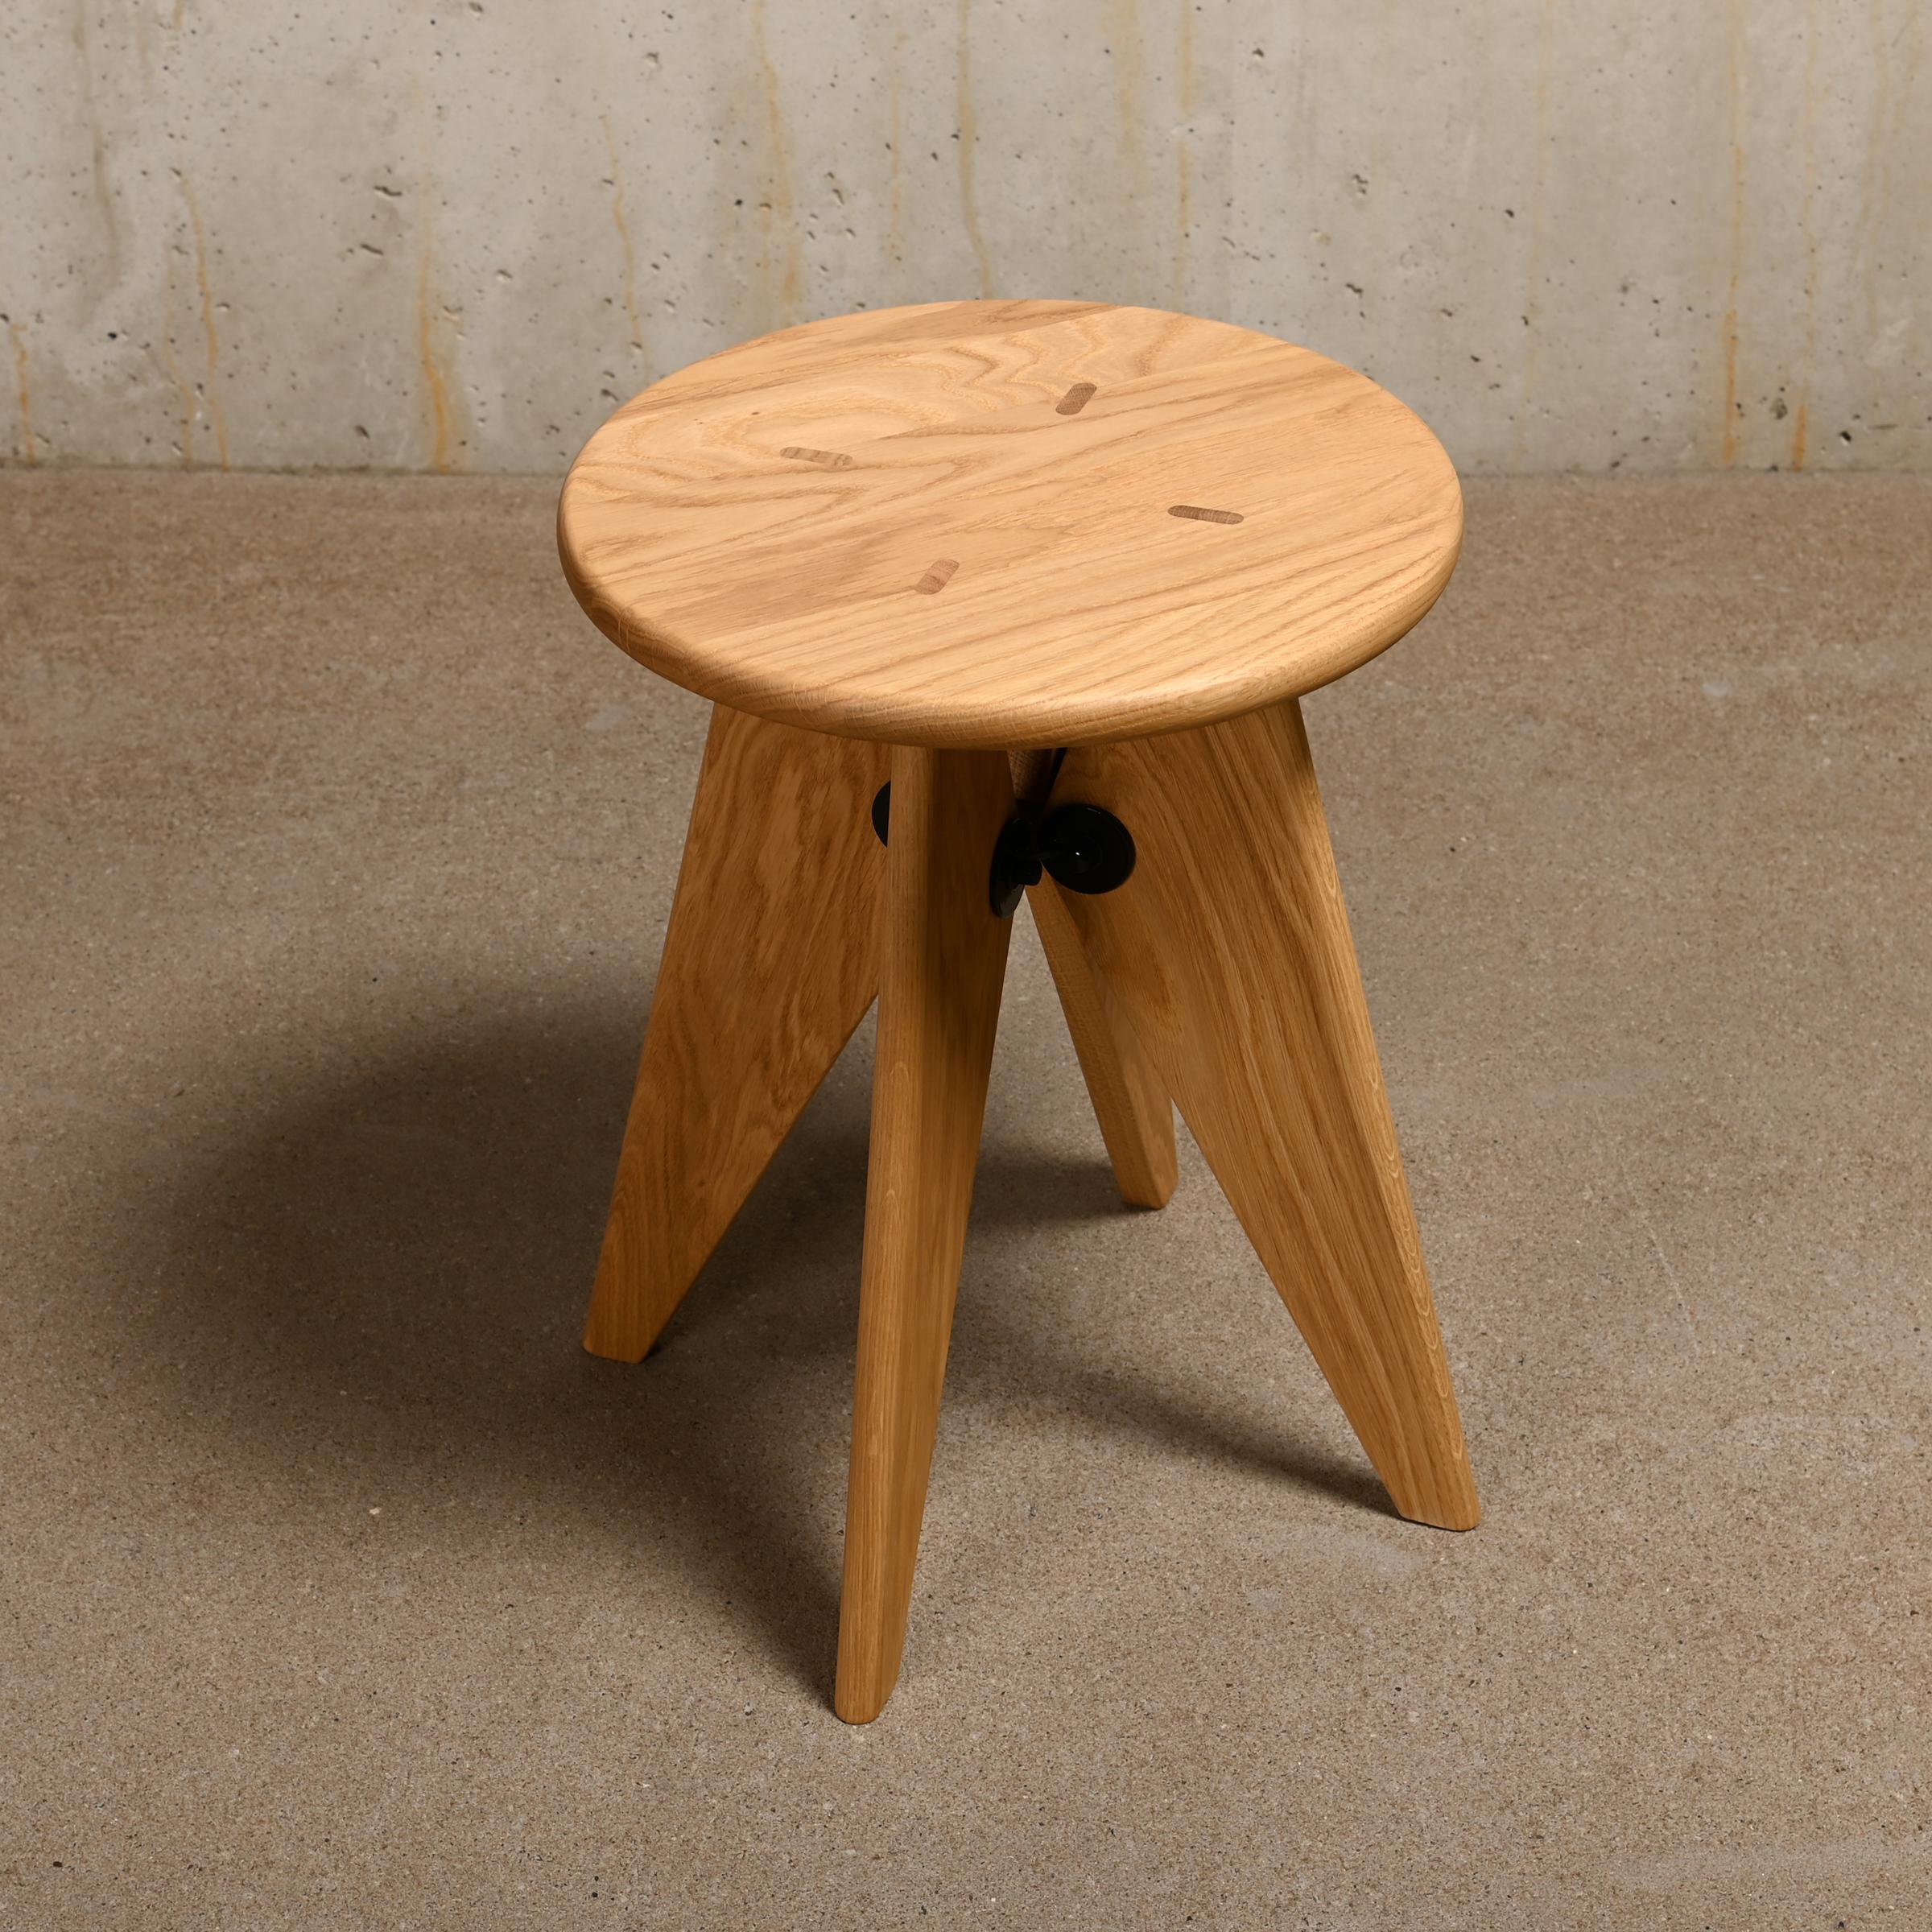 Mid-20th Century Jean Prouvé Tabouret Solvay / Bois Stool in Solid Natural Oak by Vitra For Sale